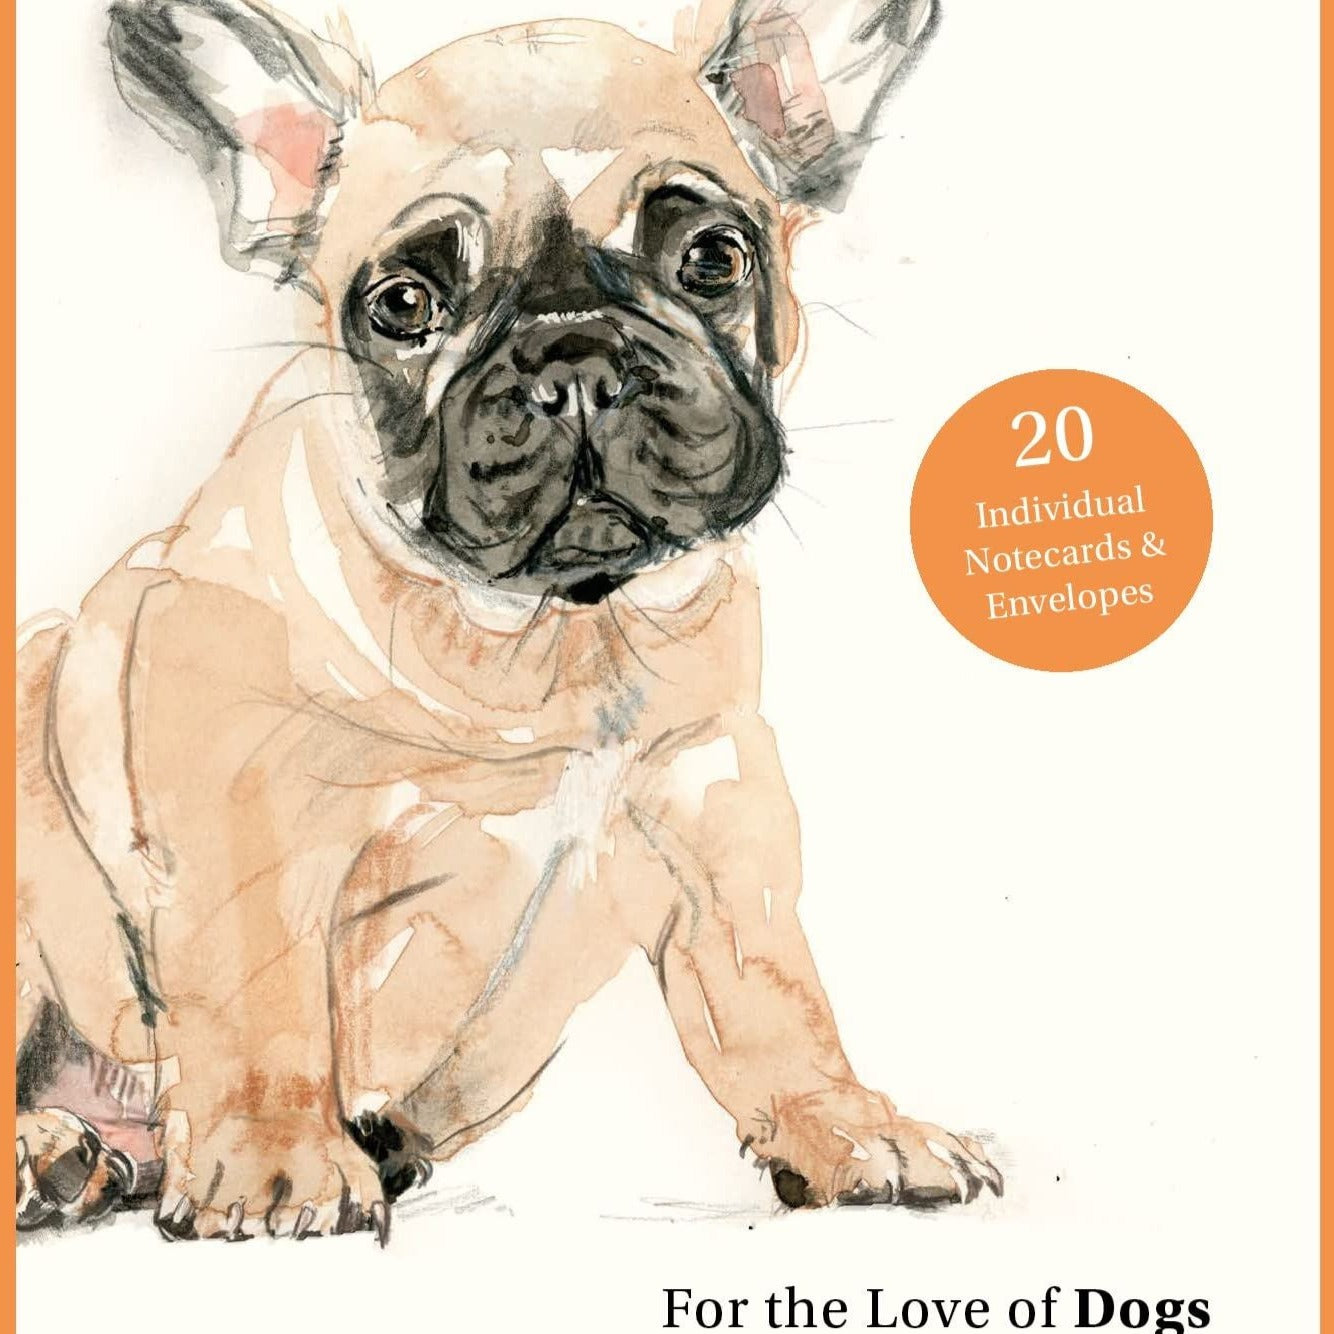 For The Love of Dogs 20 Notecards